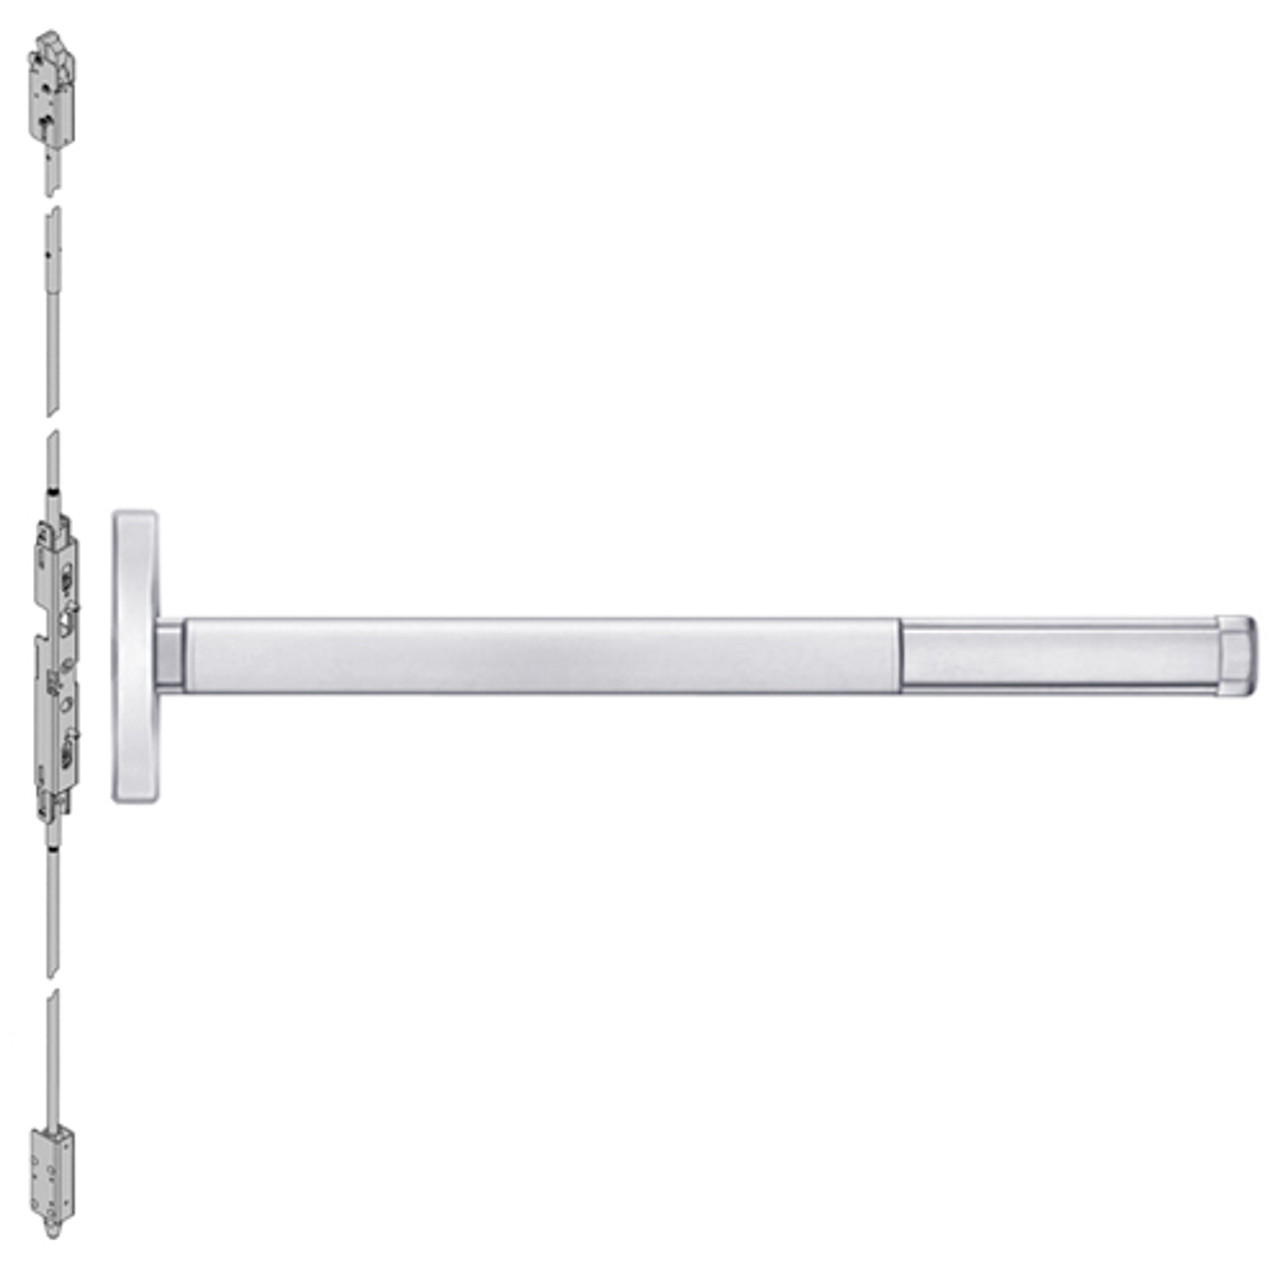 ELRFL2602-625-36 PHI 2600 Series Fire Rated Concealed Vertical Rod Exit Device with Electric Latch Retraction Prepped for Dummy Trim in Bright Chrome Finish